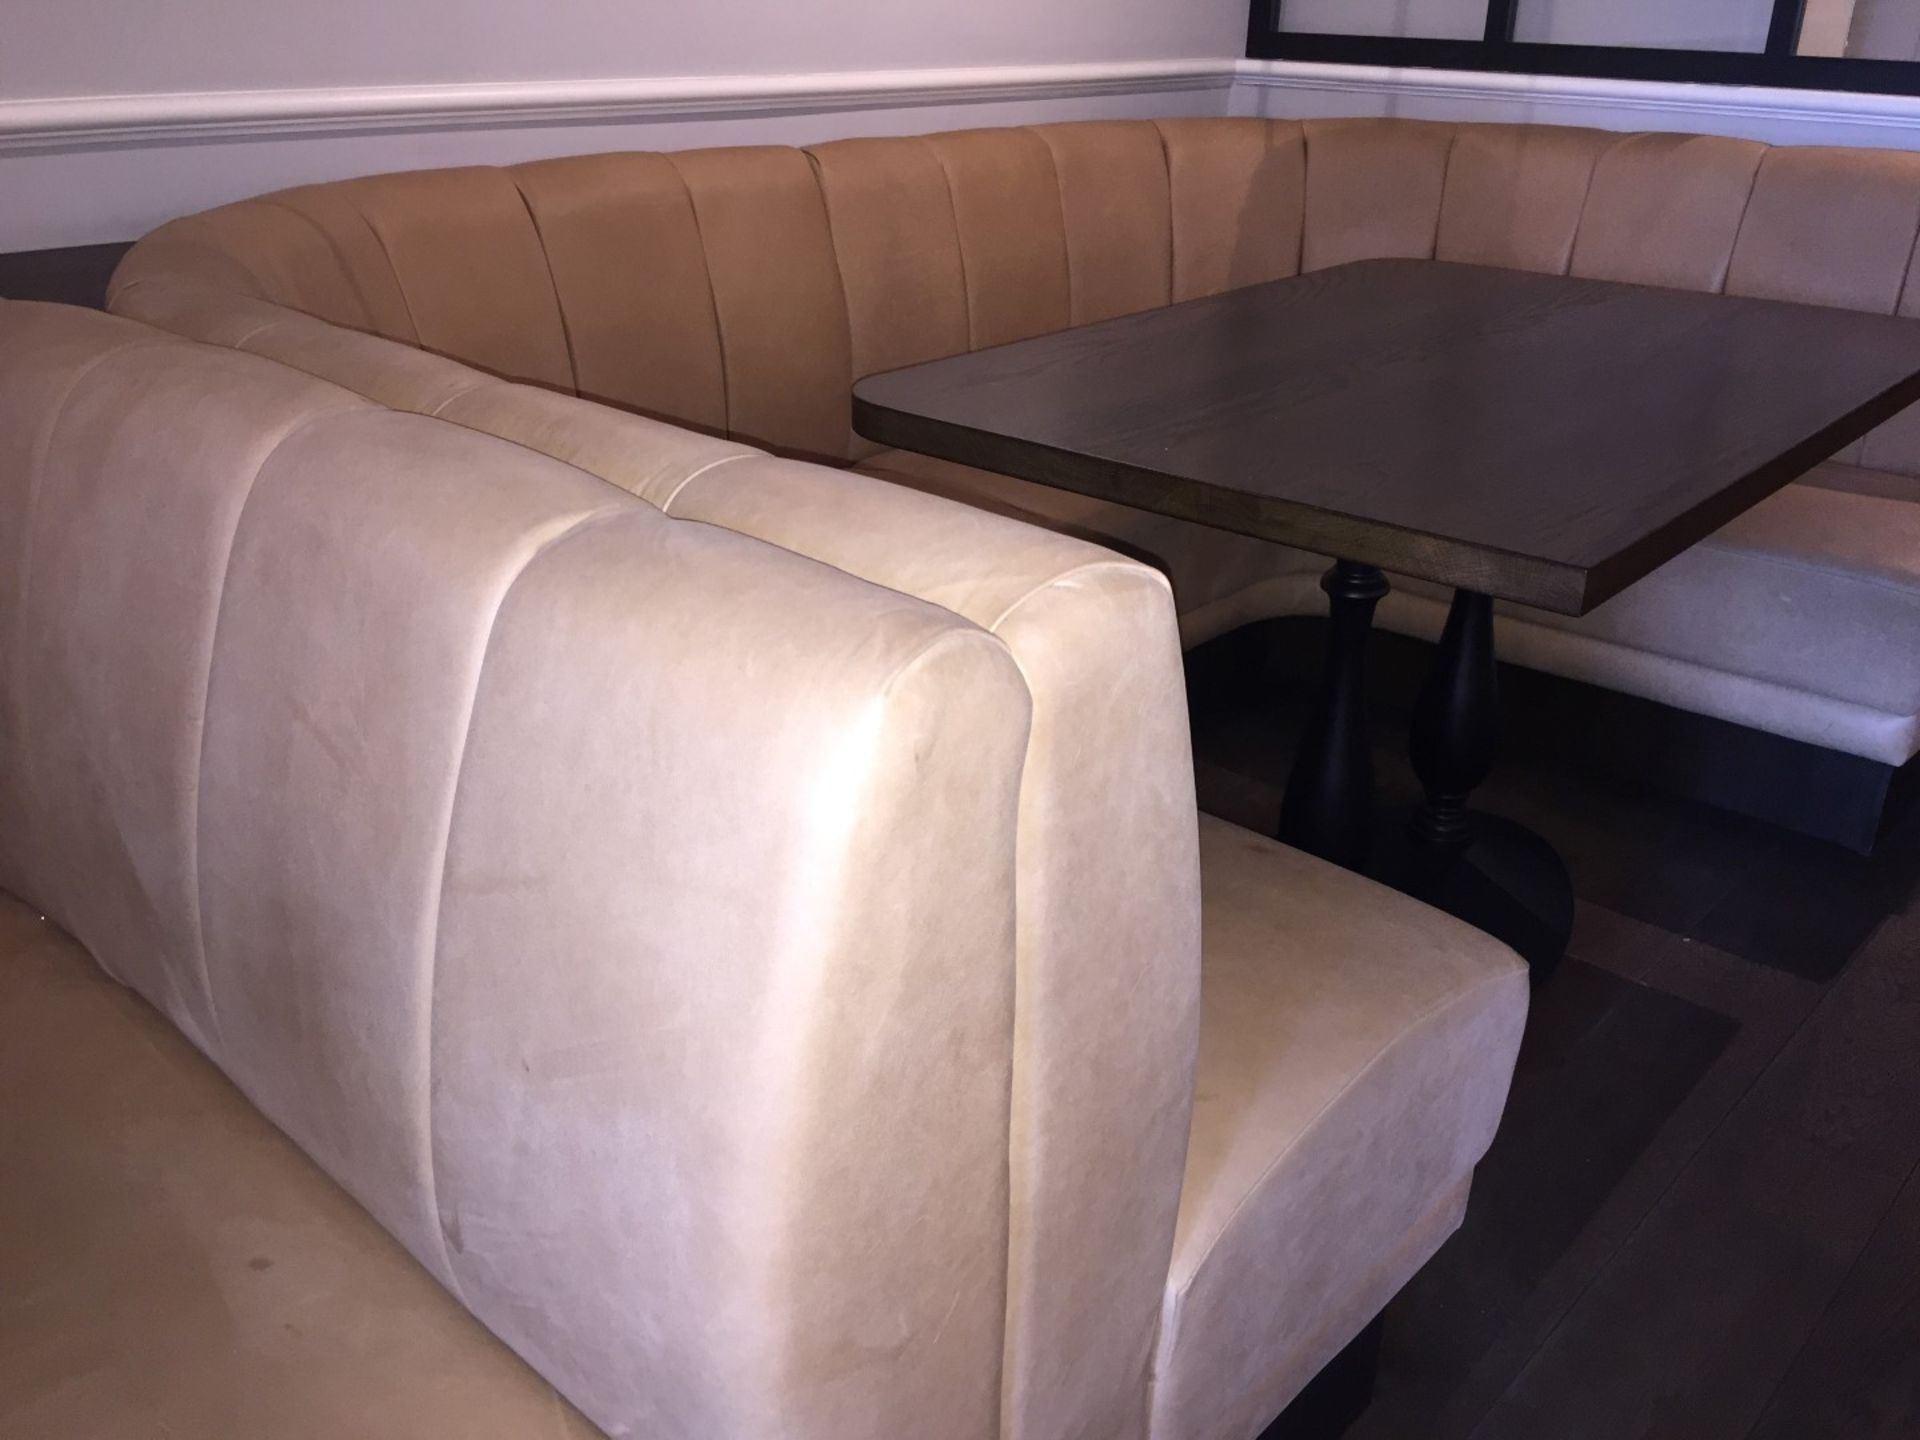 1 x Luxurious High End Curved Seating Booth - Tastefully Upholstered In Cream Leather with - Image 7 of 14